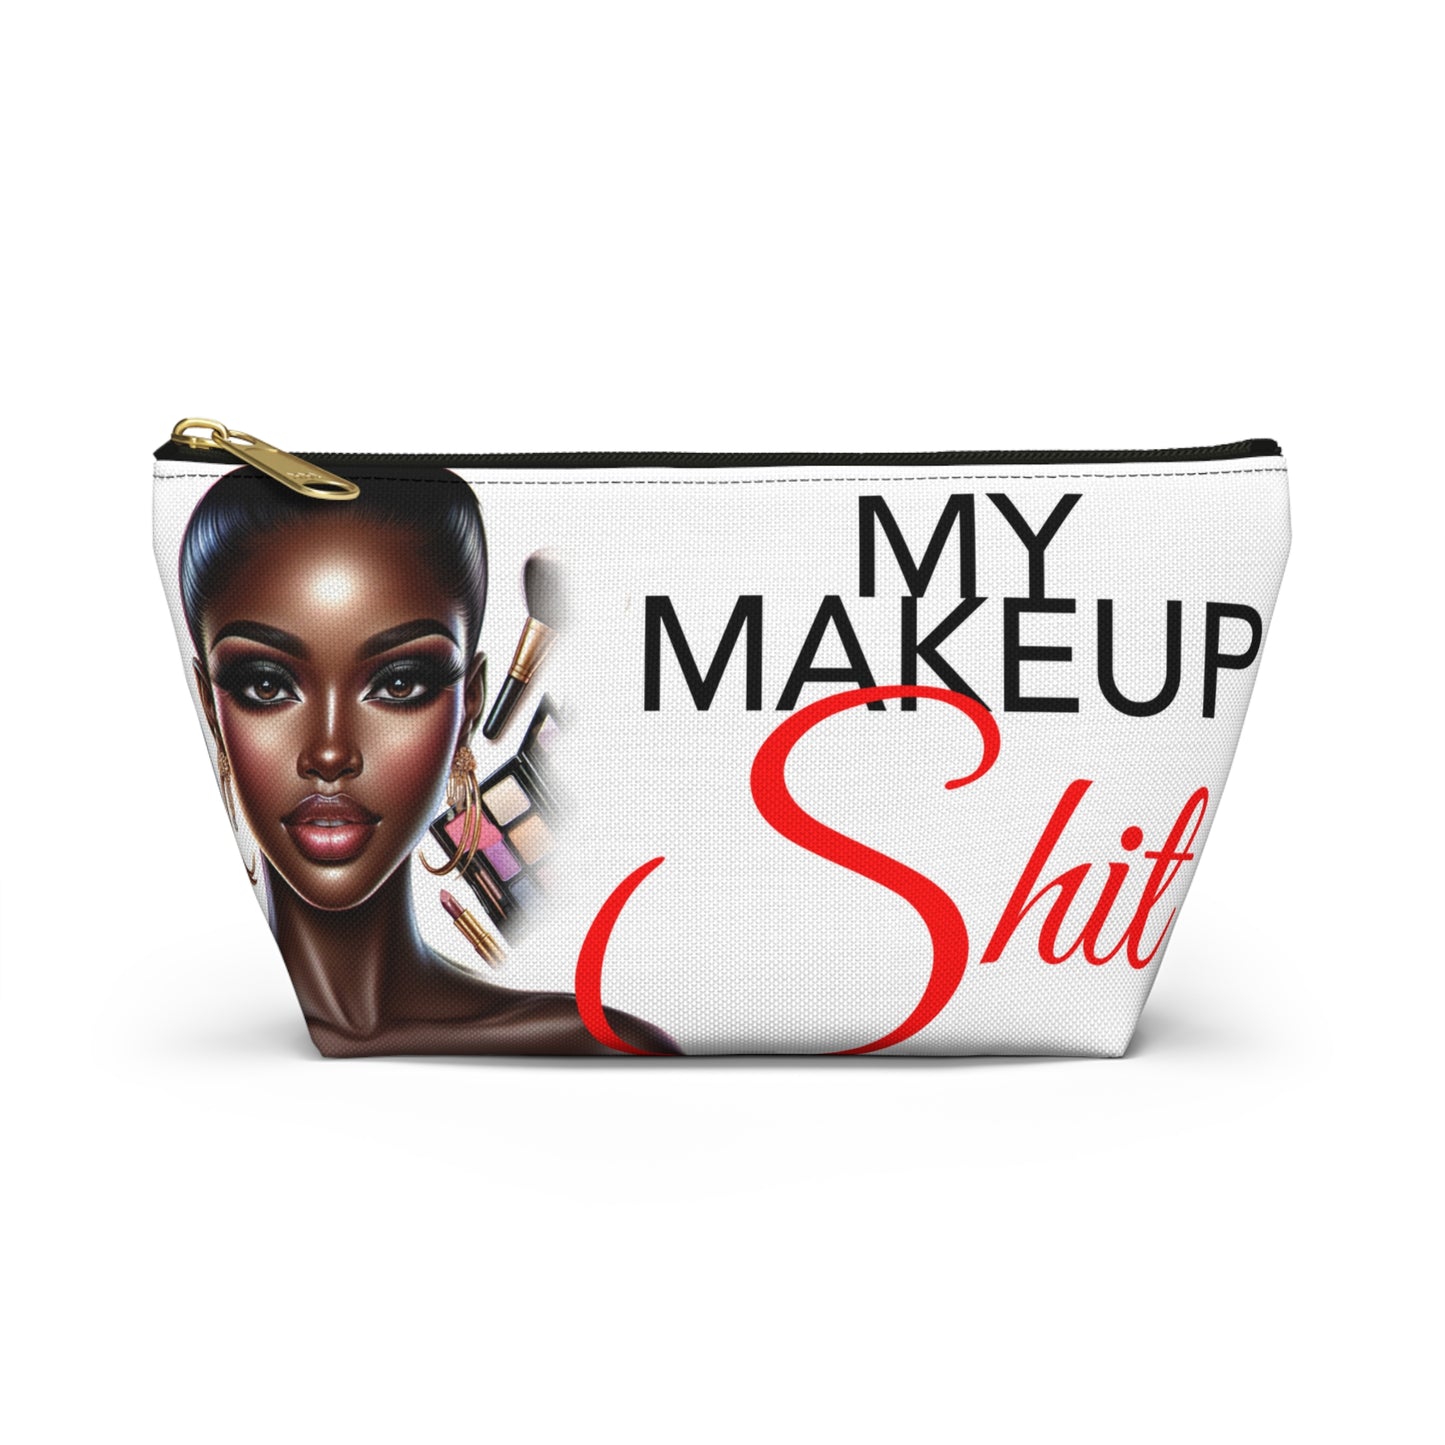 Copy of My Makeup Pouch - Compact Cosmetic Bag  Portable Beauty Organizer, Small Makeup Case, Trendy Makeup Bag, Makeup Storage, Accessory Pouch